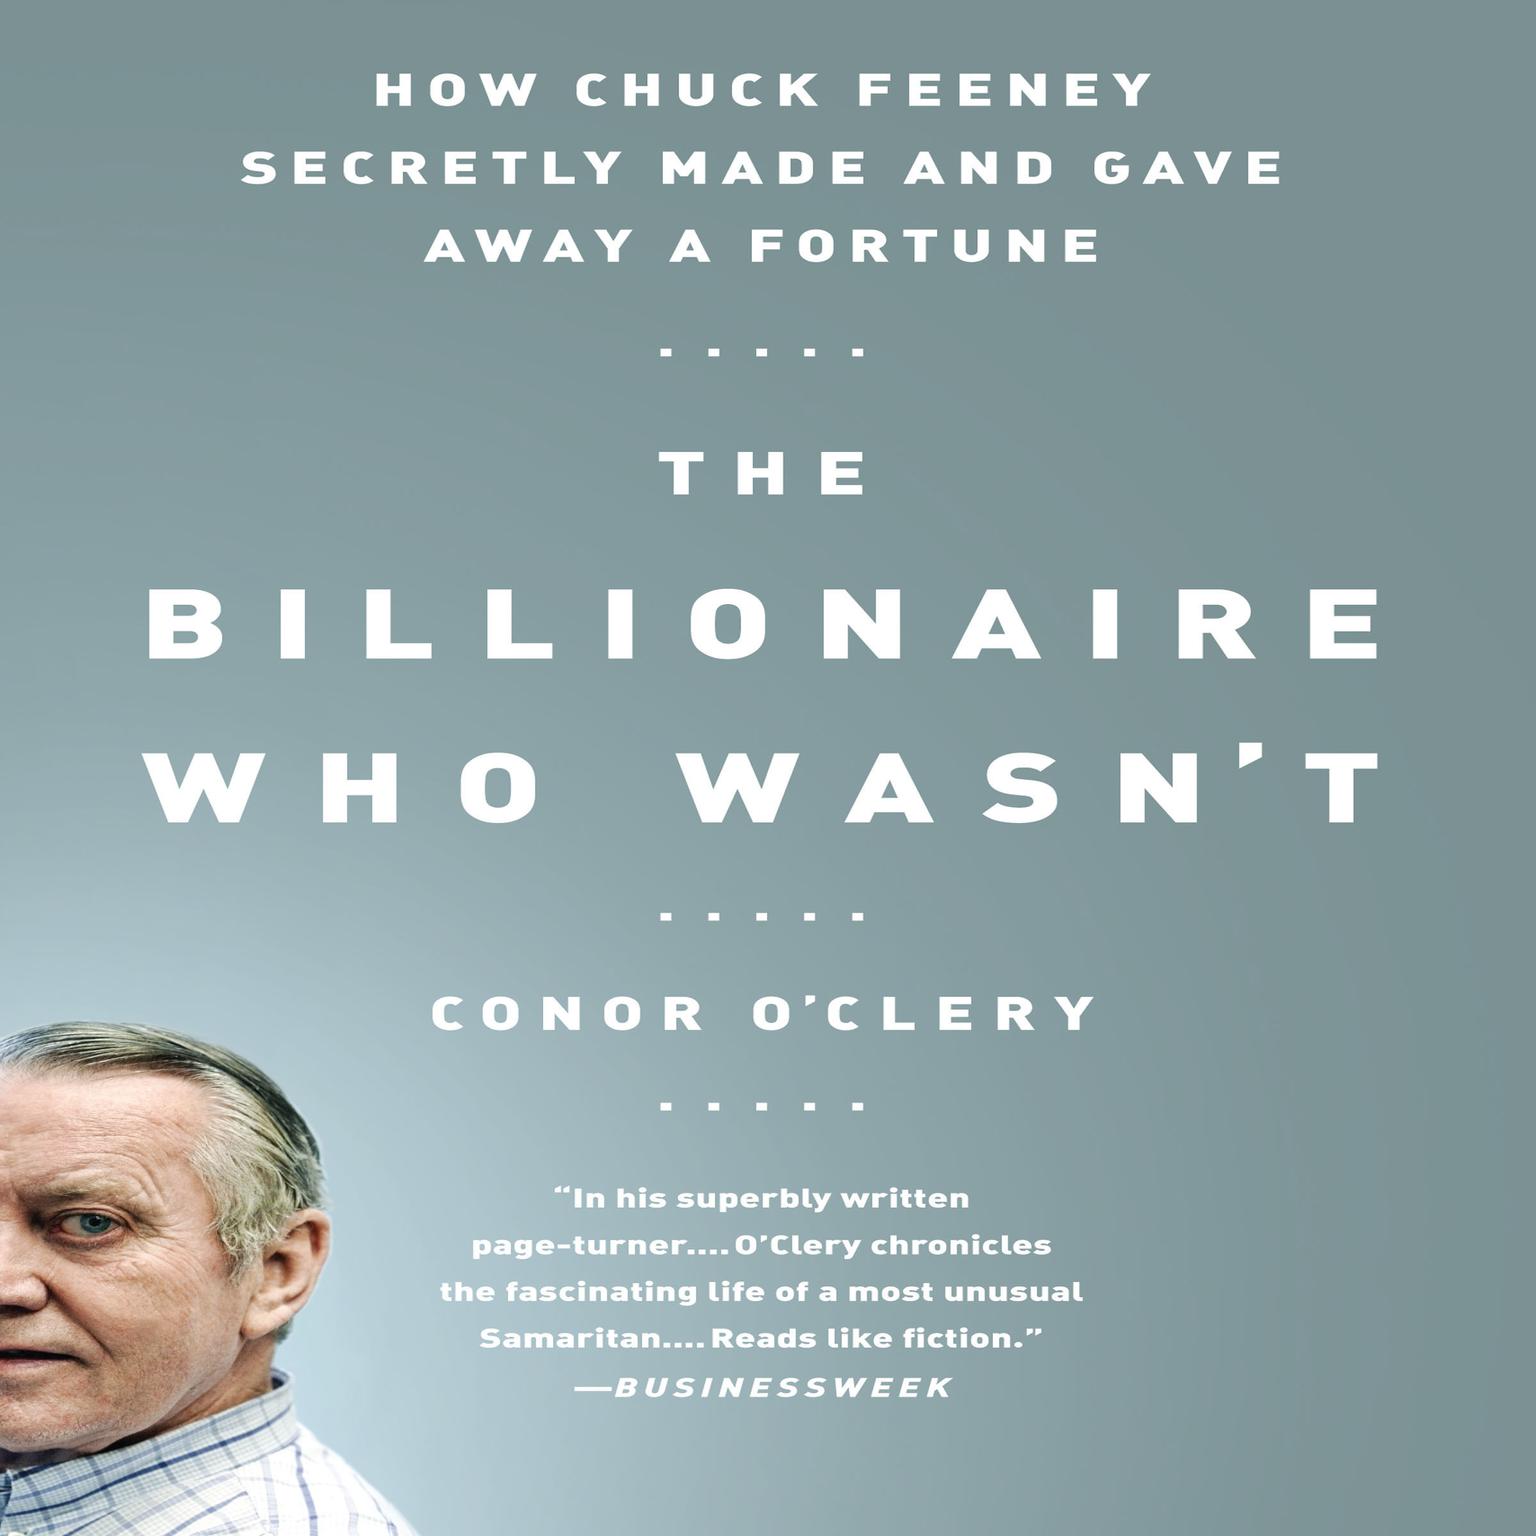 The Billionaire Who Wasnt: How Chuck Feeney Secretly Made and Gave Away a Fortune Audiobook, by Conor O’Clery